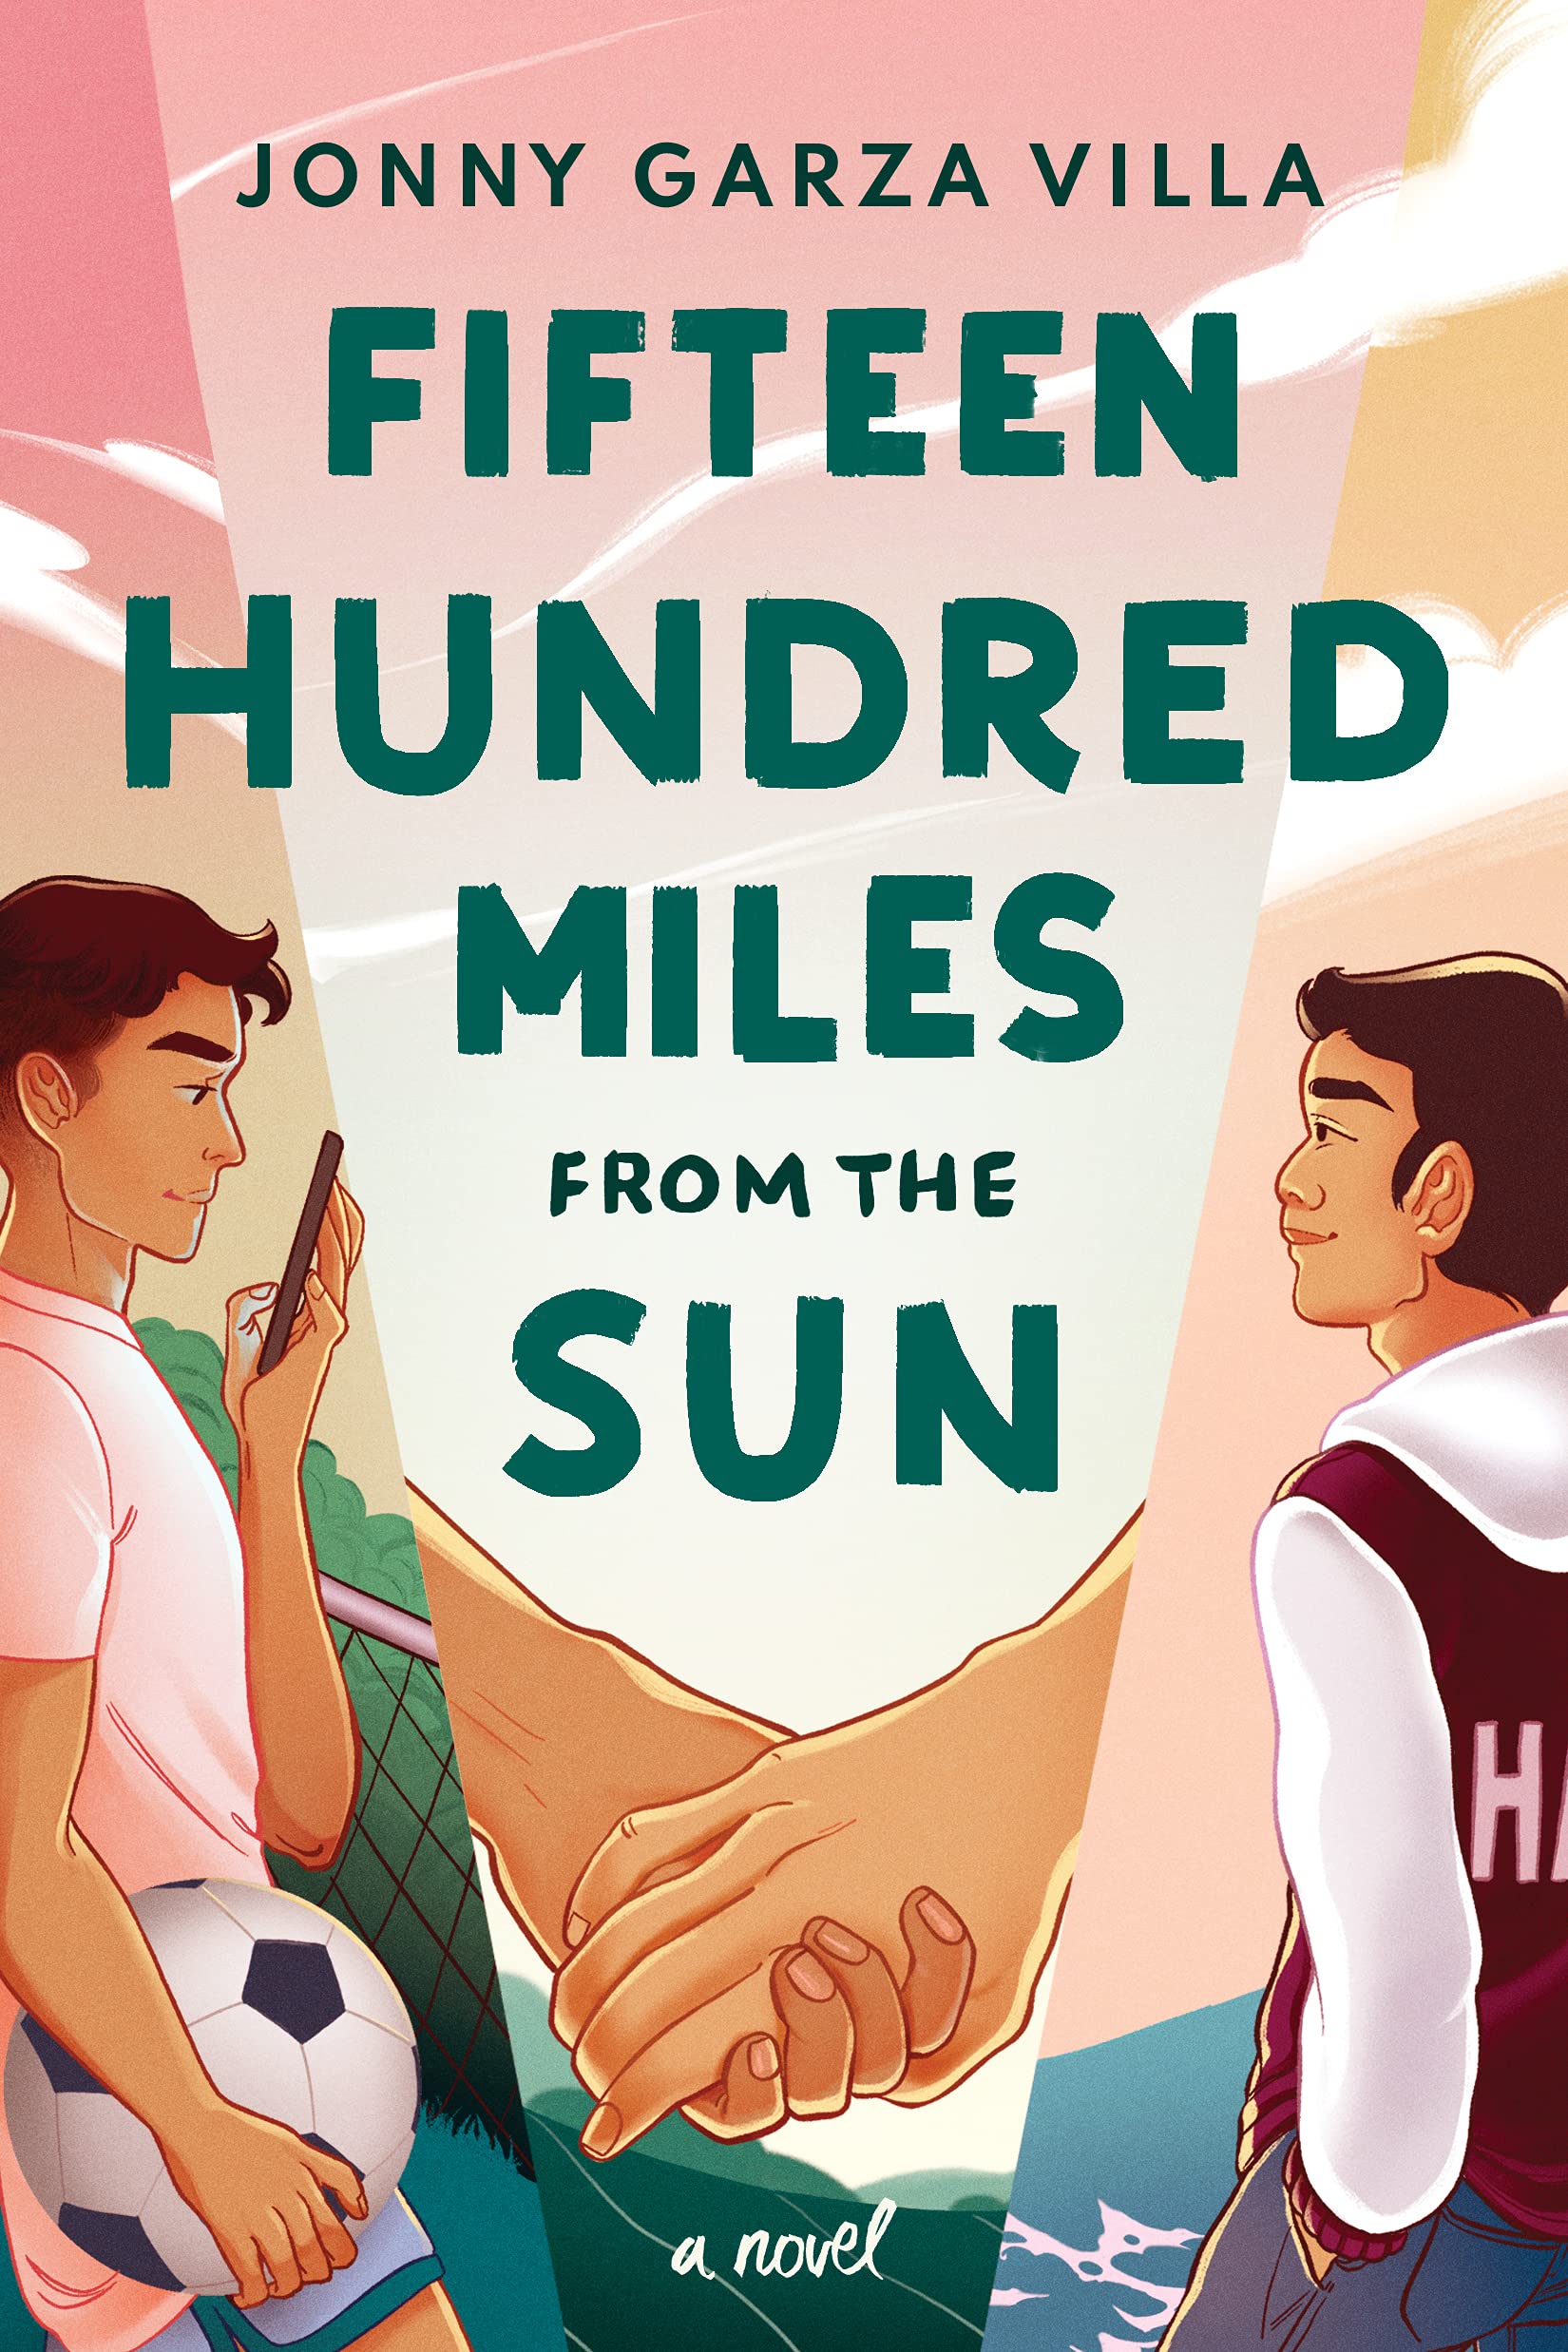 The cover of the book, depicting two teenage boys and their hands joined in the middle